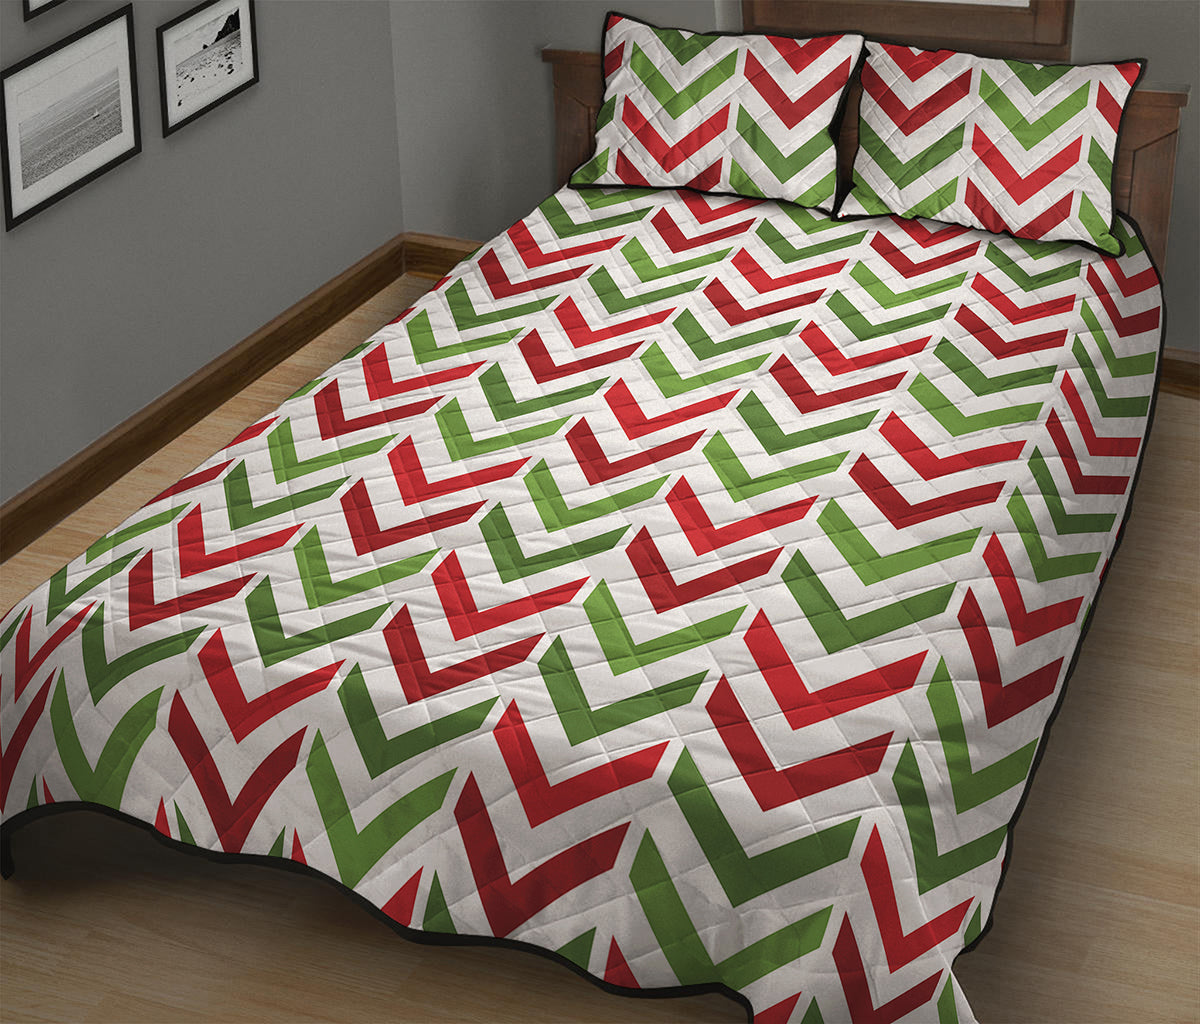 Zigzag Merry Christmas Pattern Print Quilt Bed Set